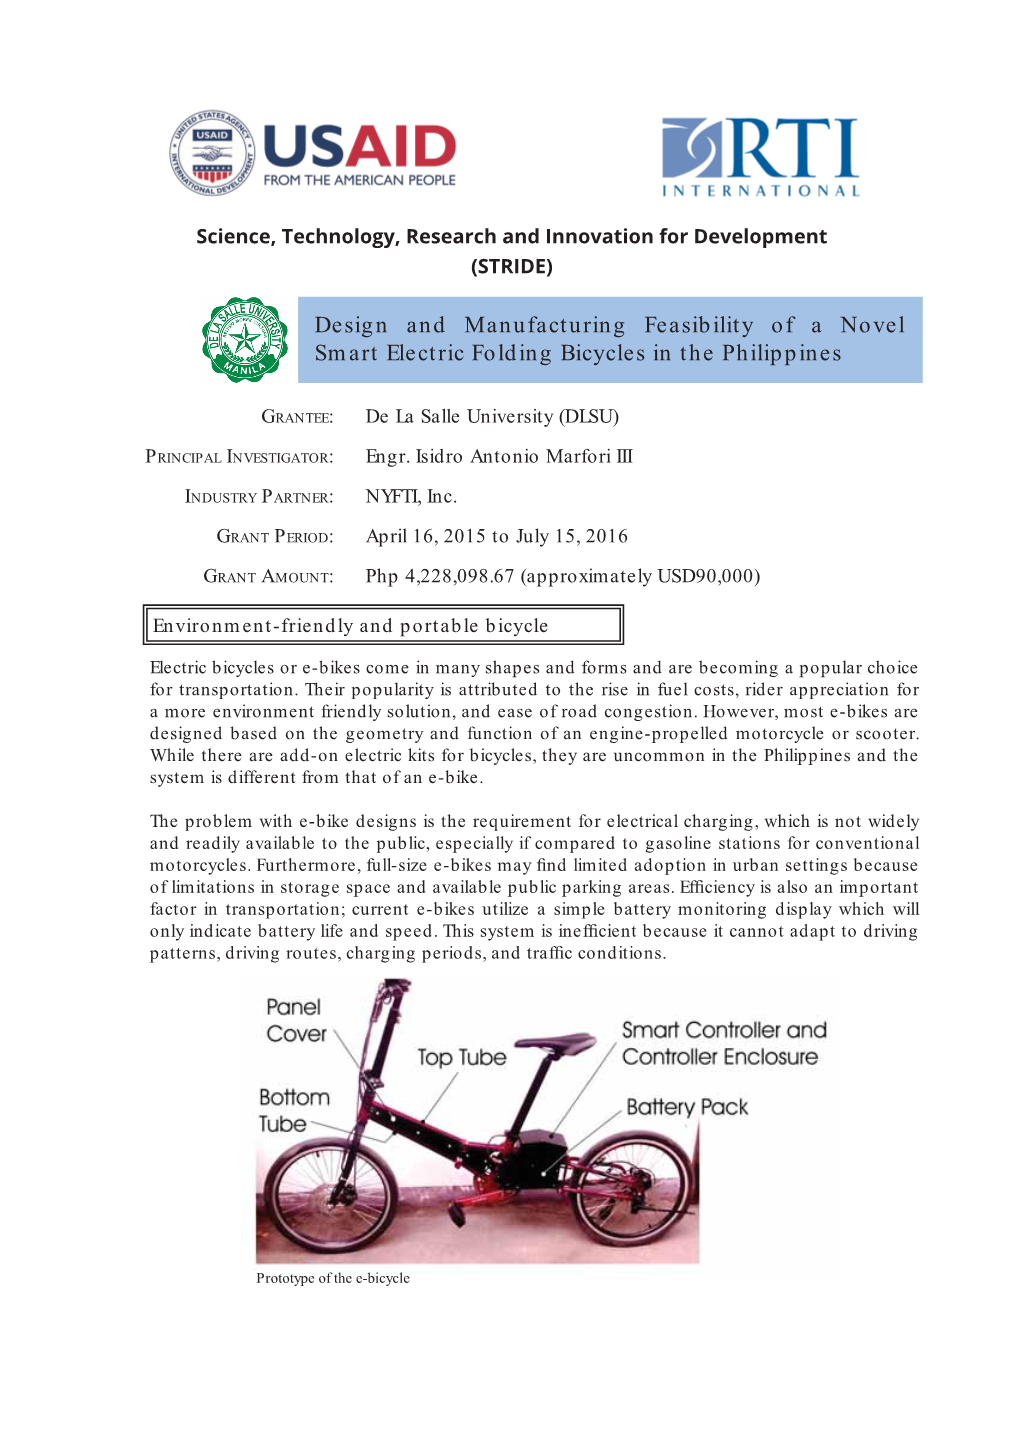 Design and Manufacturing Feasibility of a Novel Smart Electric Folding Bicycles in the Philippines